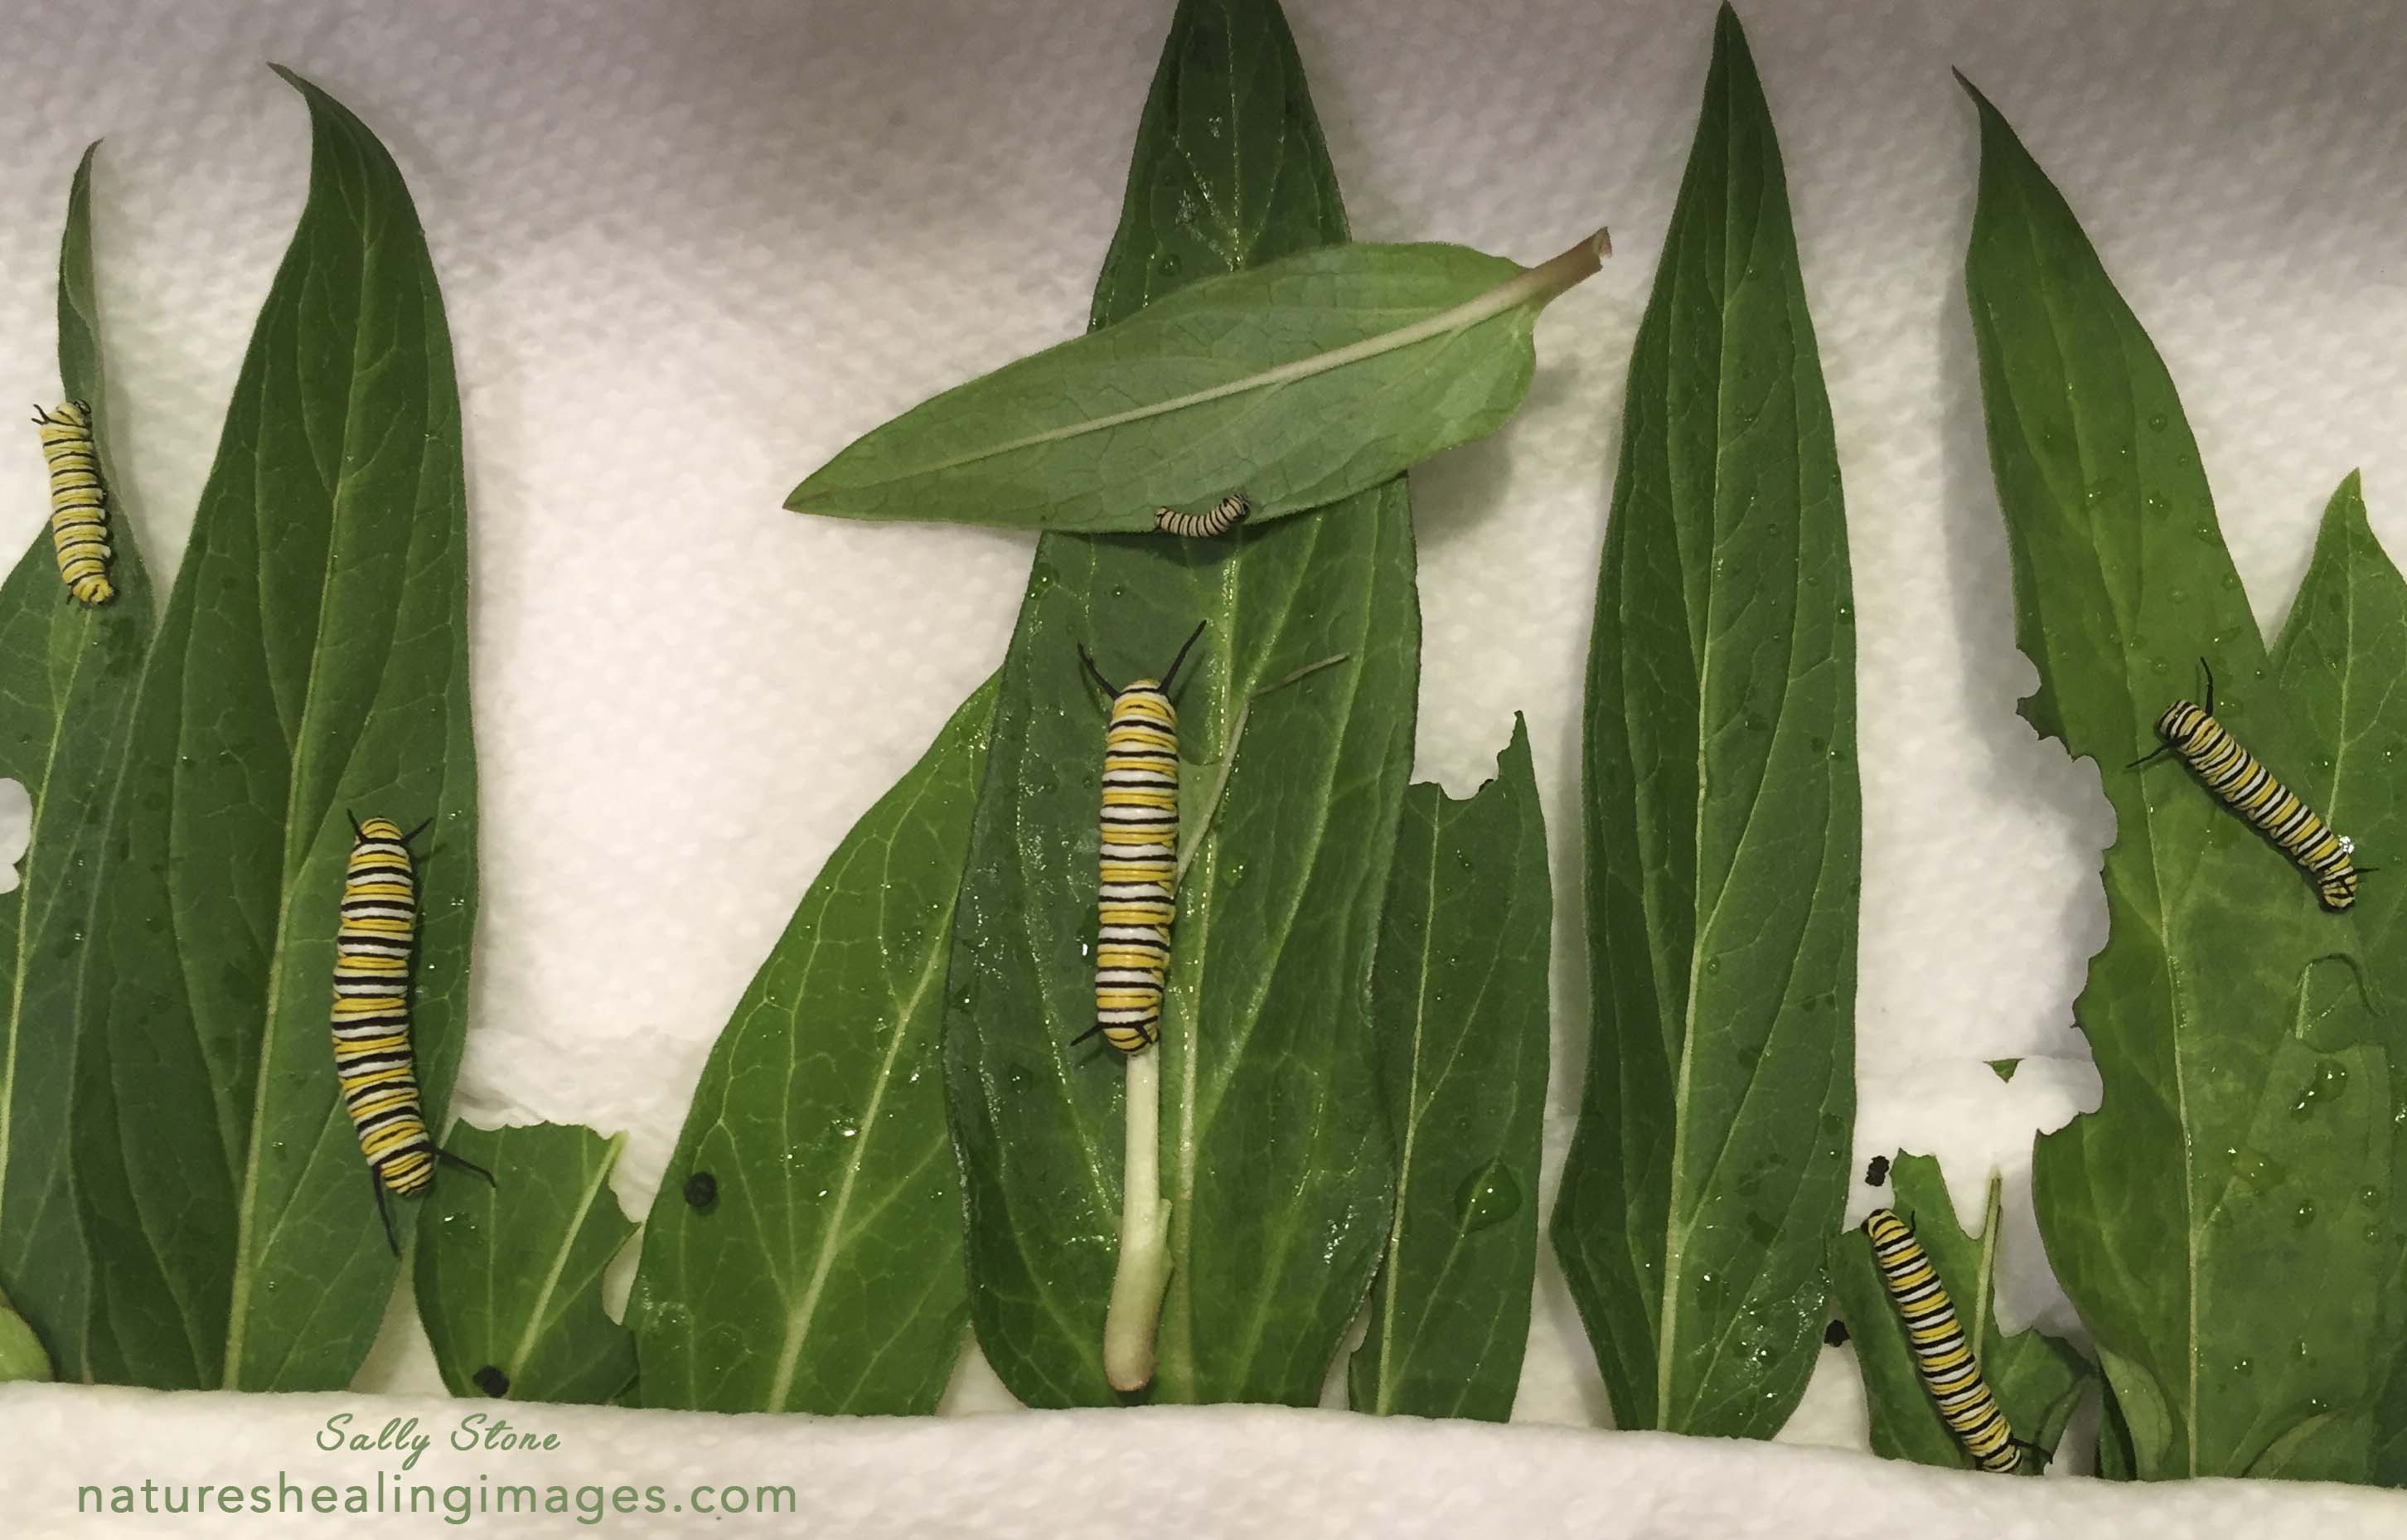 Five Large Monarch Caterpillars and One Small Caterpillar on Milkweed Leaves